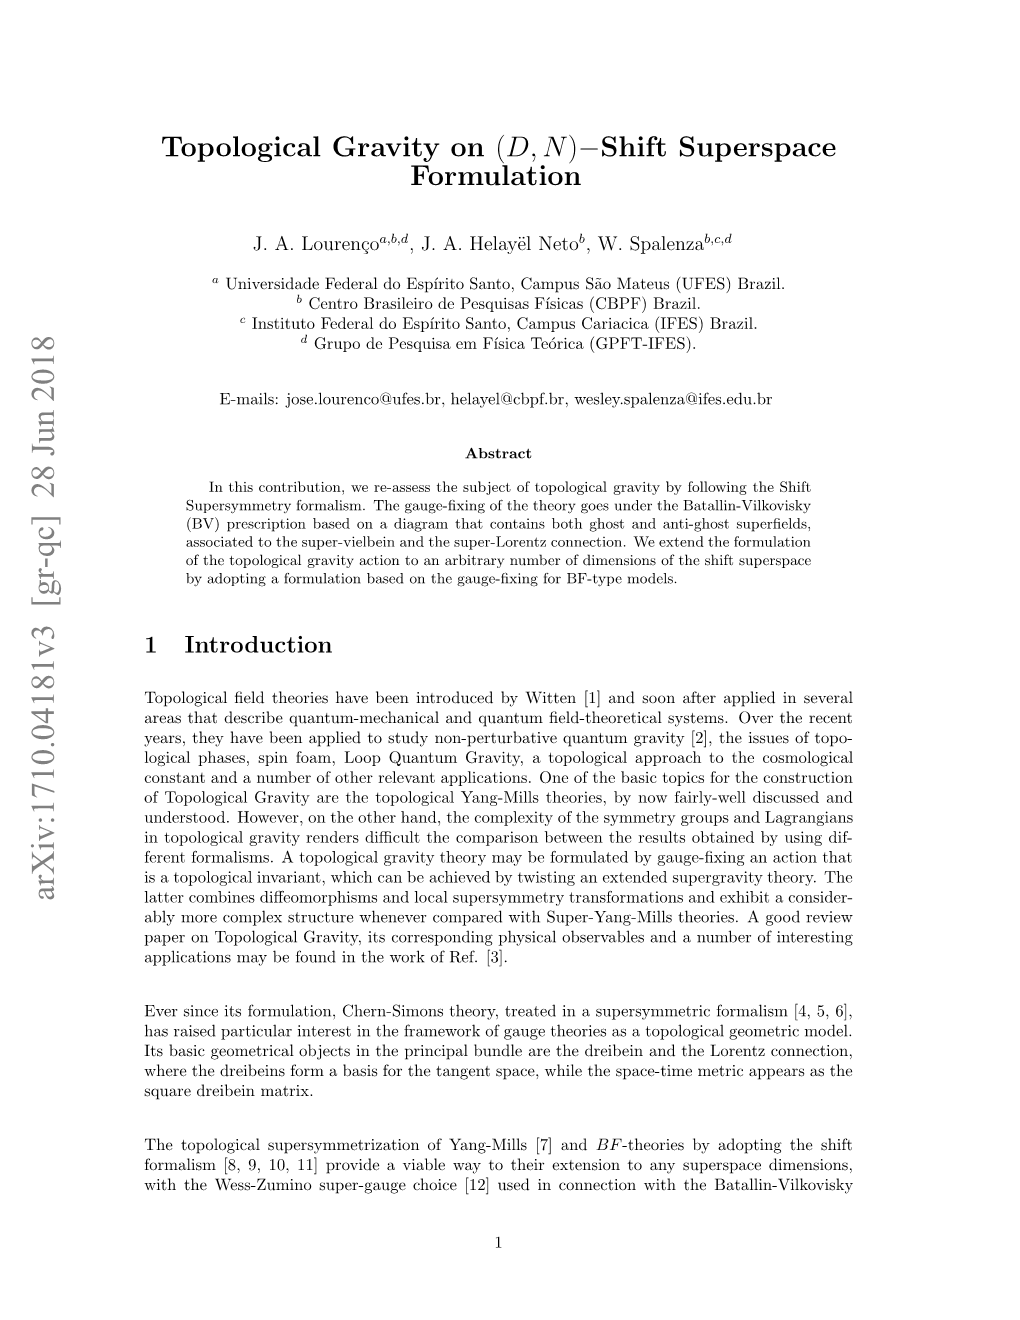 Topological Gravity on (D, N)−Shift Superspace Formulation